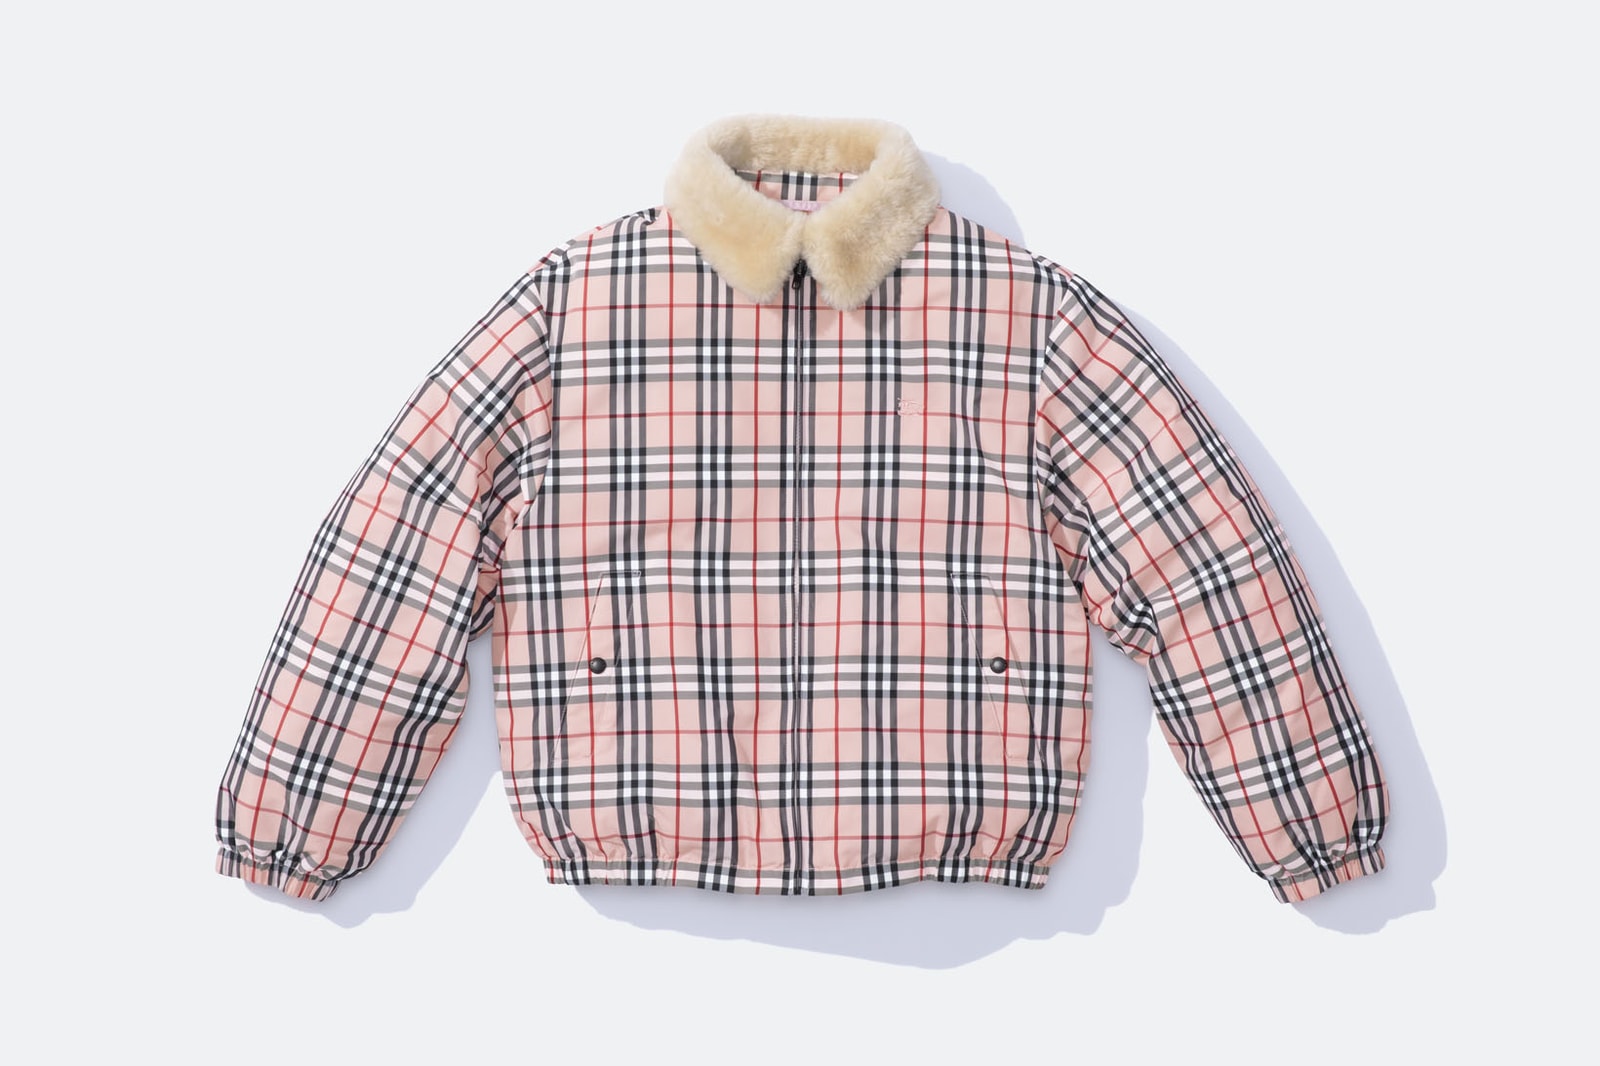 Burberry x Supreme Collaboration Official Images | Hypebae